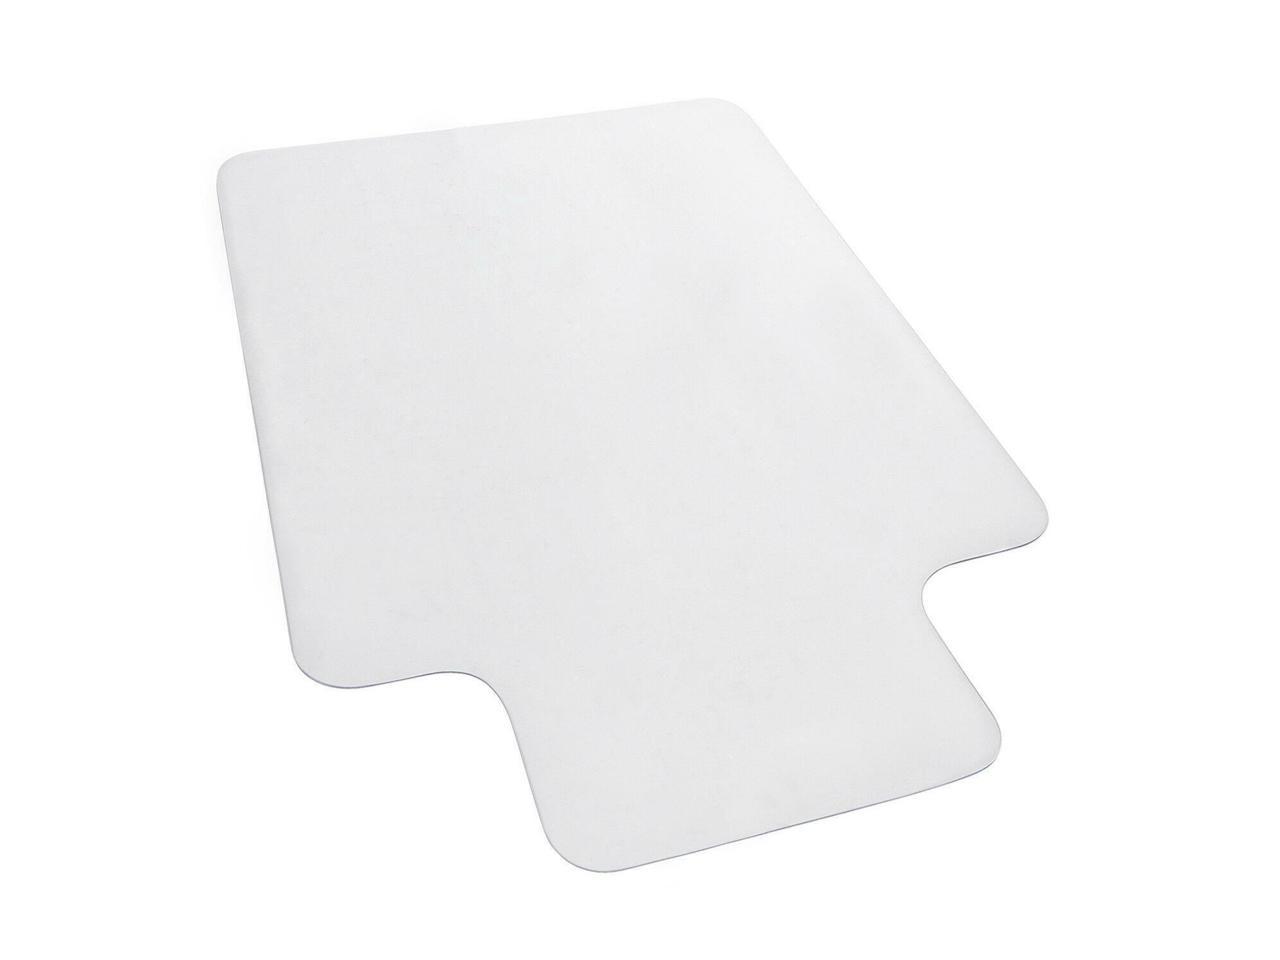 New PVC 48"x36" Chair Office Home Desk Floor Mat for Tile Wood 1.50mm With Lip 